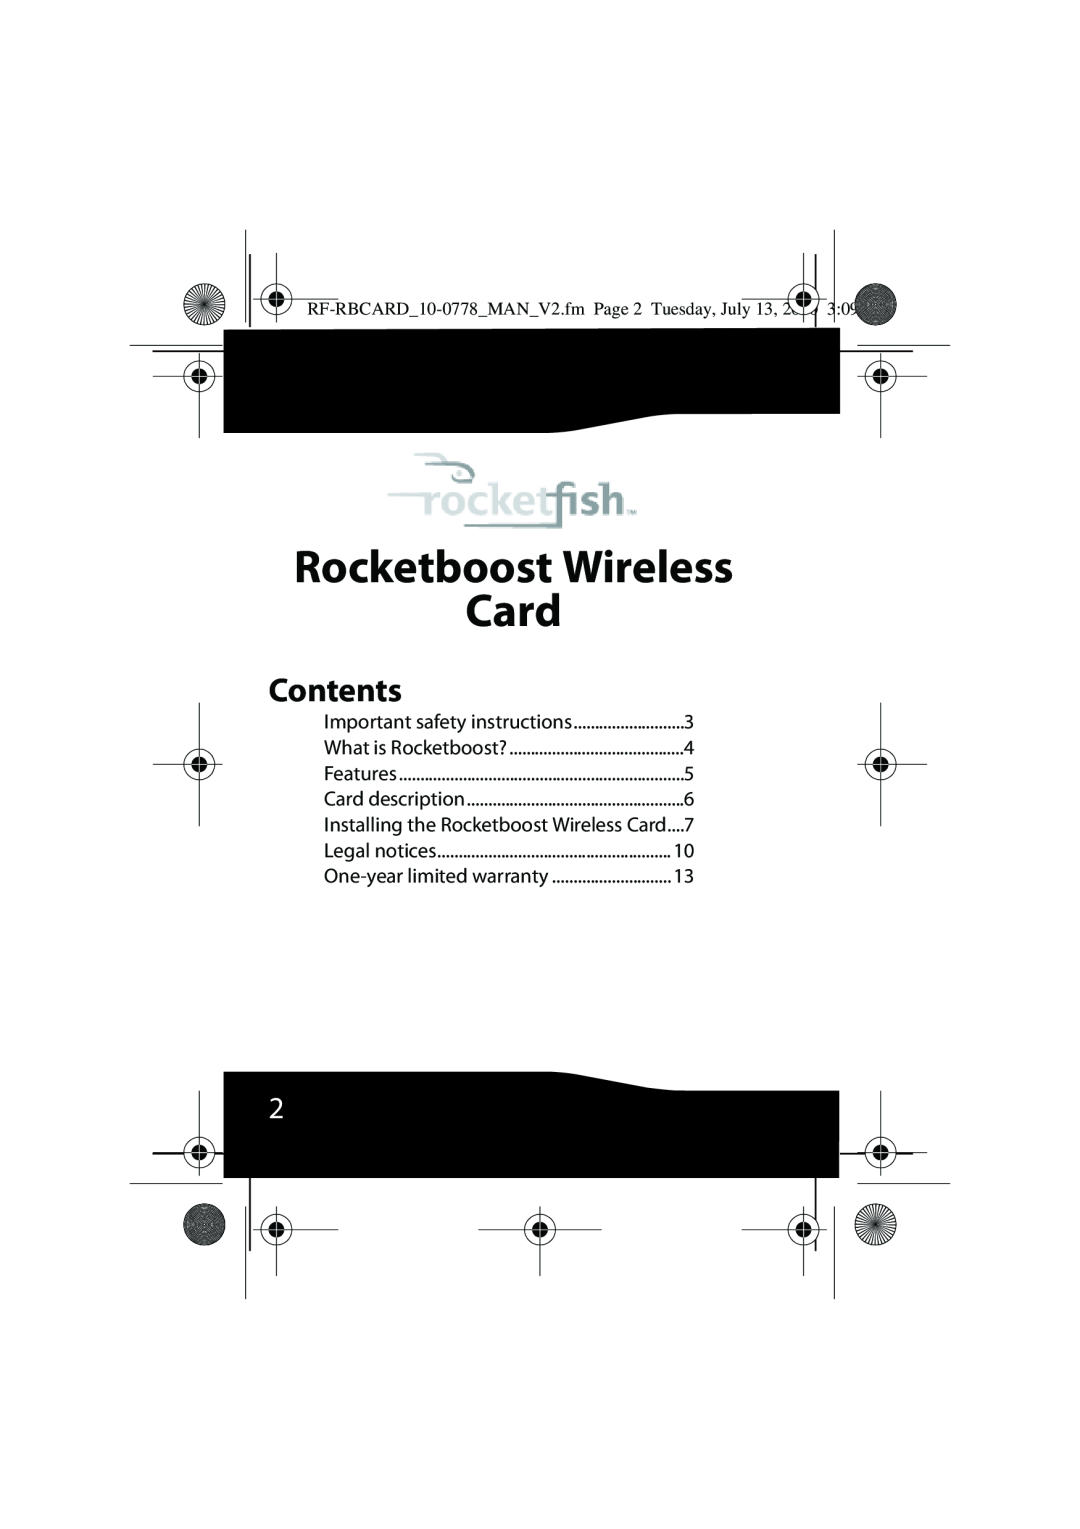 RocketFish Contents, Rocketboost Wireless Card, RF-RBCARD10-0778MANV2.fm Page 2 Tuesday, July 13, 2010 309 PM, Features 